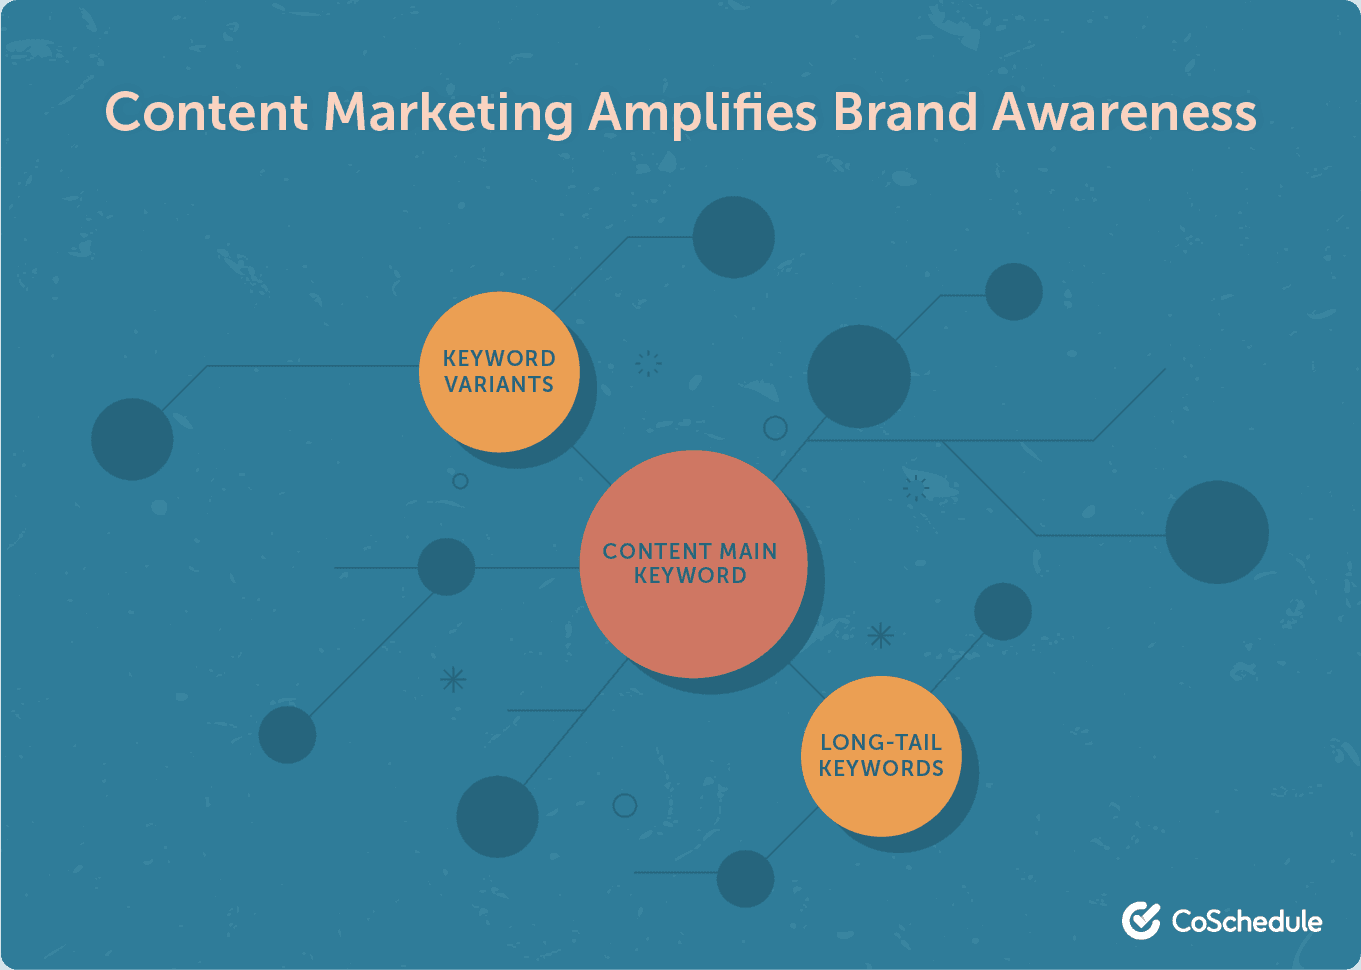 Content marketing increases brand awareness